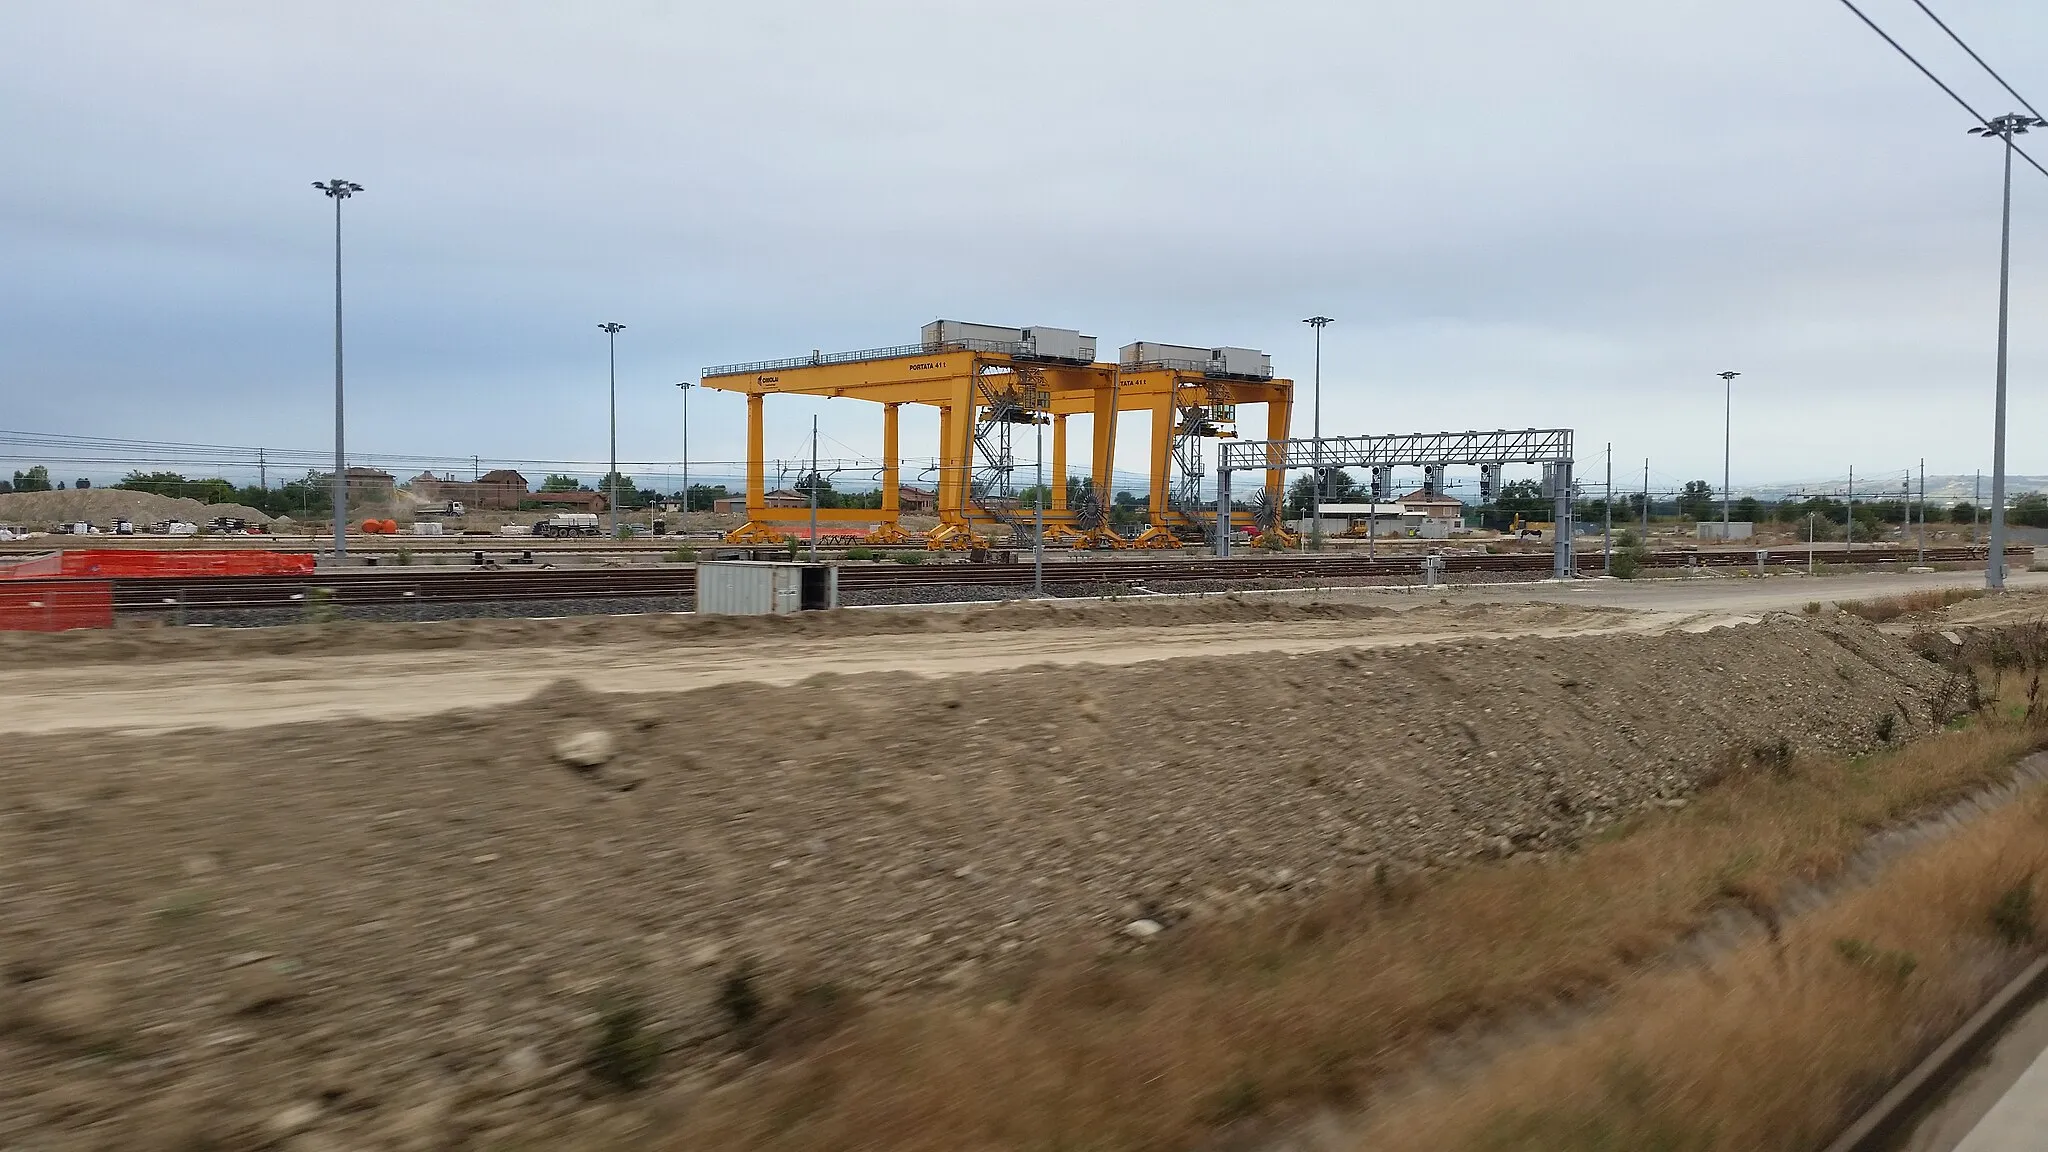 Photo showing: Marzaglia goods station - August 2015 - container crane, tracks and sidings